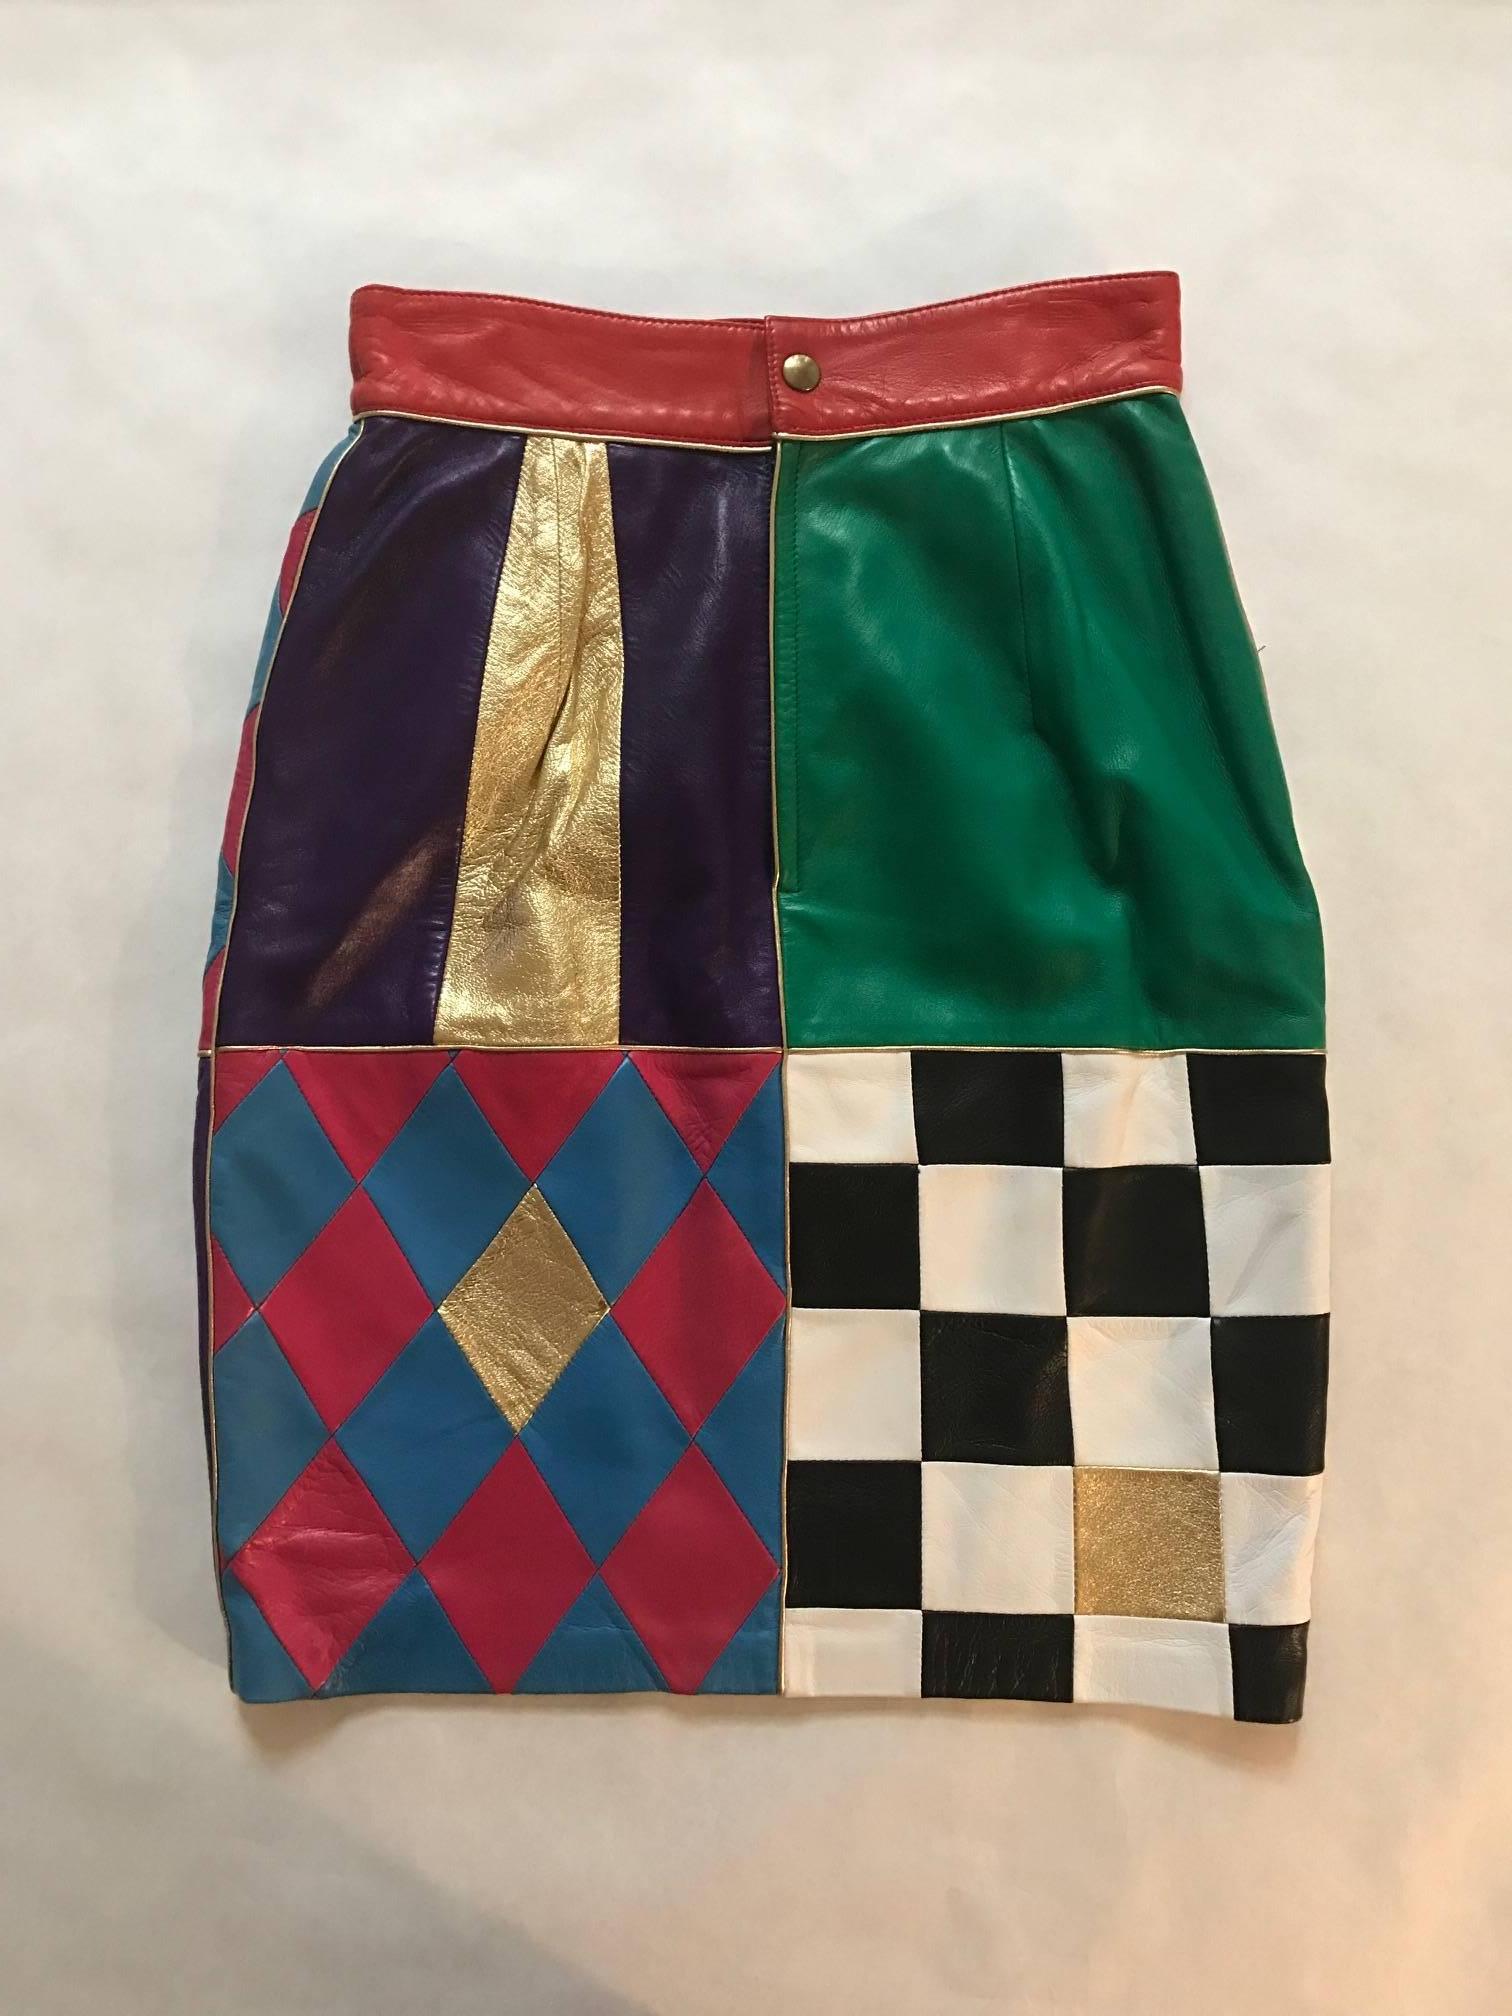 Vintage 1980's Moschino Leather patchwork pencil skirt. Features red and blue harlequin print, stripes, checks, and floral embroidery with gold accents. Super sexy slim pencil silhouette. Back zip and snap. 

100% leather.
Fully lined in 70%